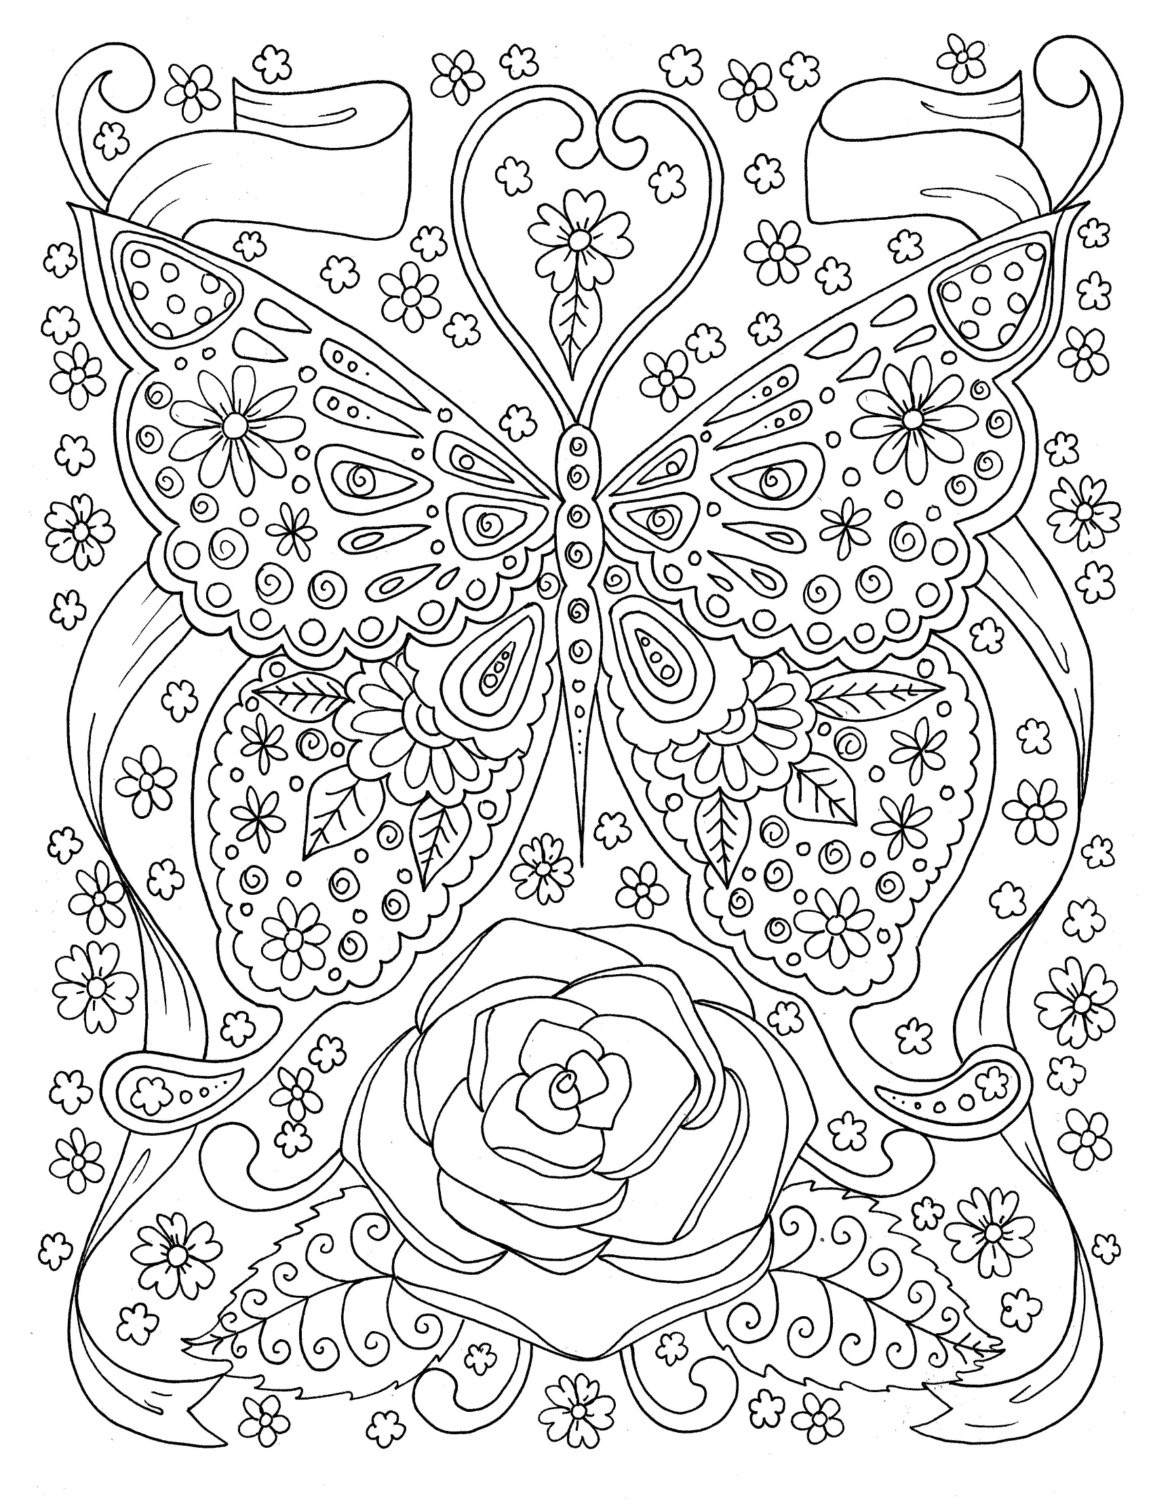 Butterfly Adult Coloring Pages
 Butterfly Coloring page Adult Coloring Book Digital Coloring